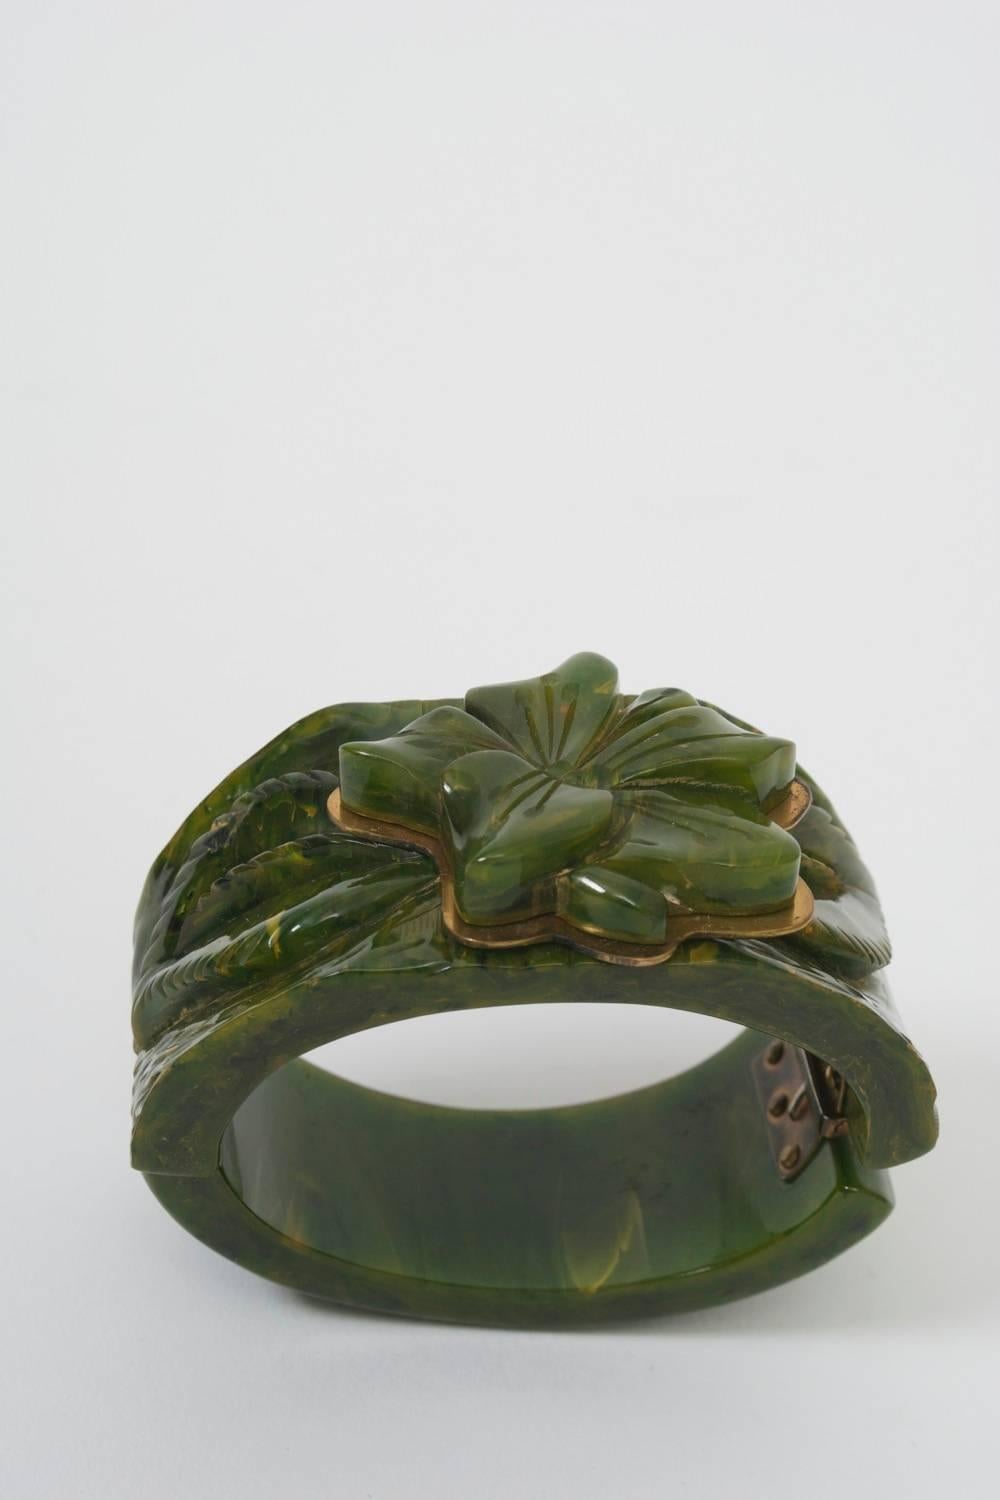 Vintage bakelite clamper bracelet in marbled green with leaf carving on the wide bangle centering an applied carved flower atop a brass cutout echoing its shape. Width at top of bangle 1.75